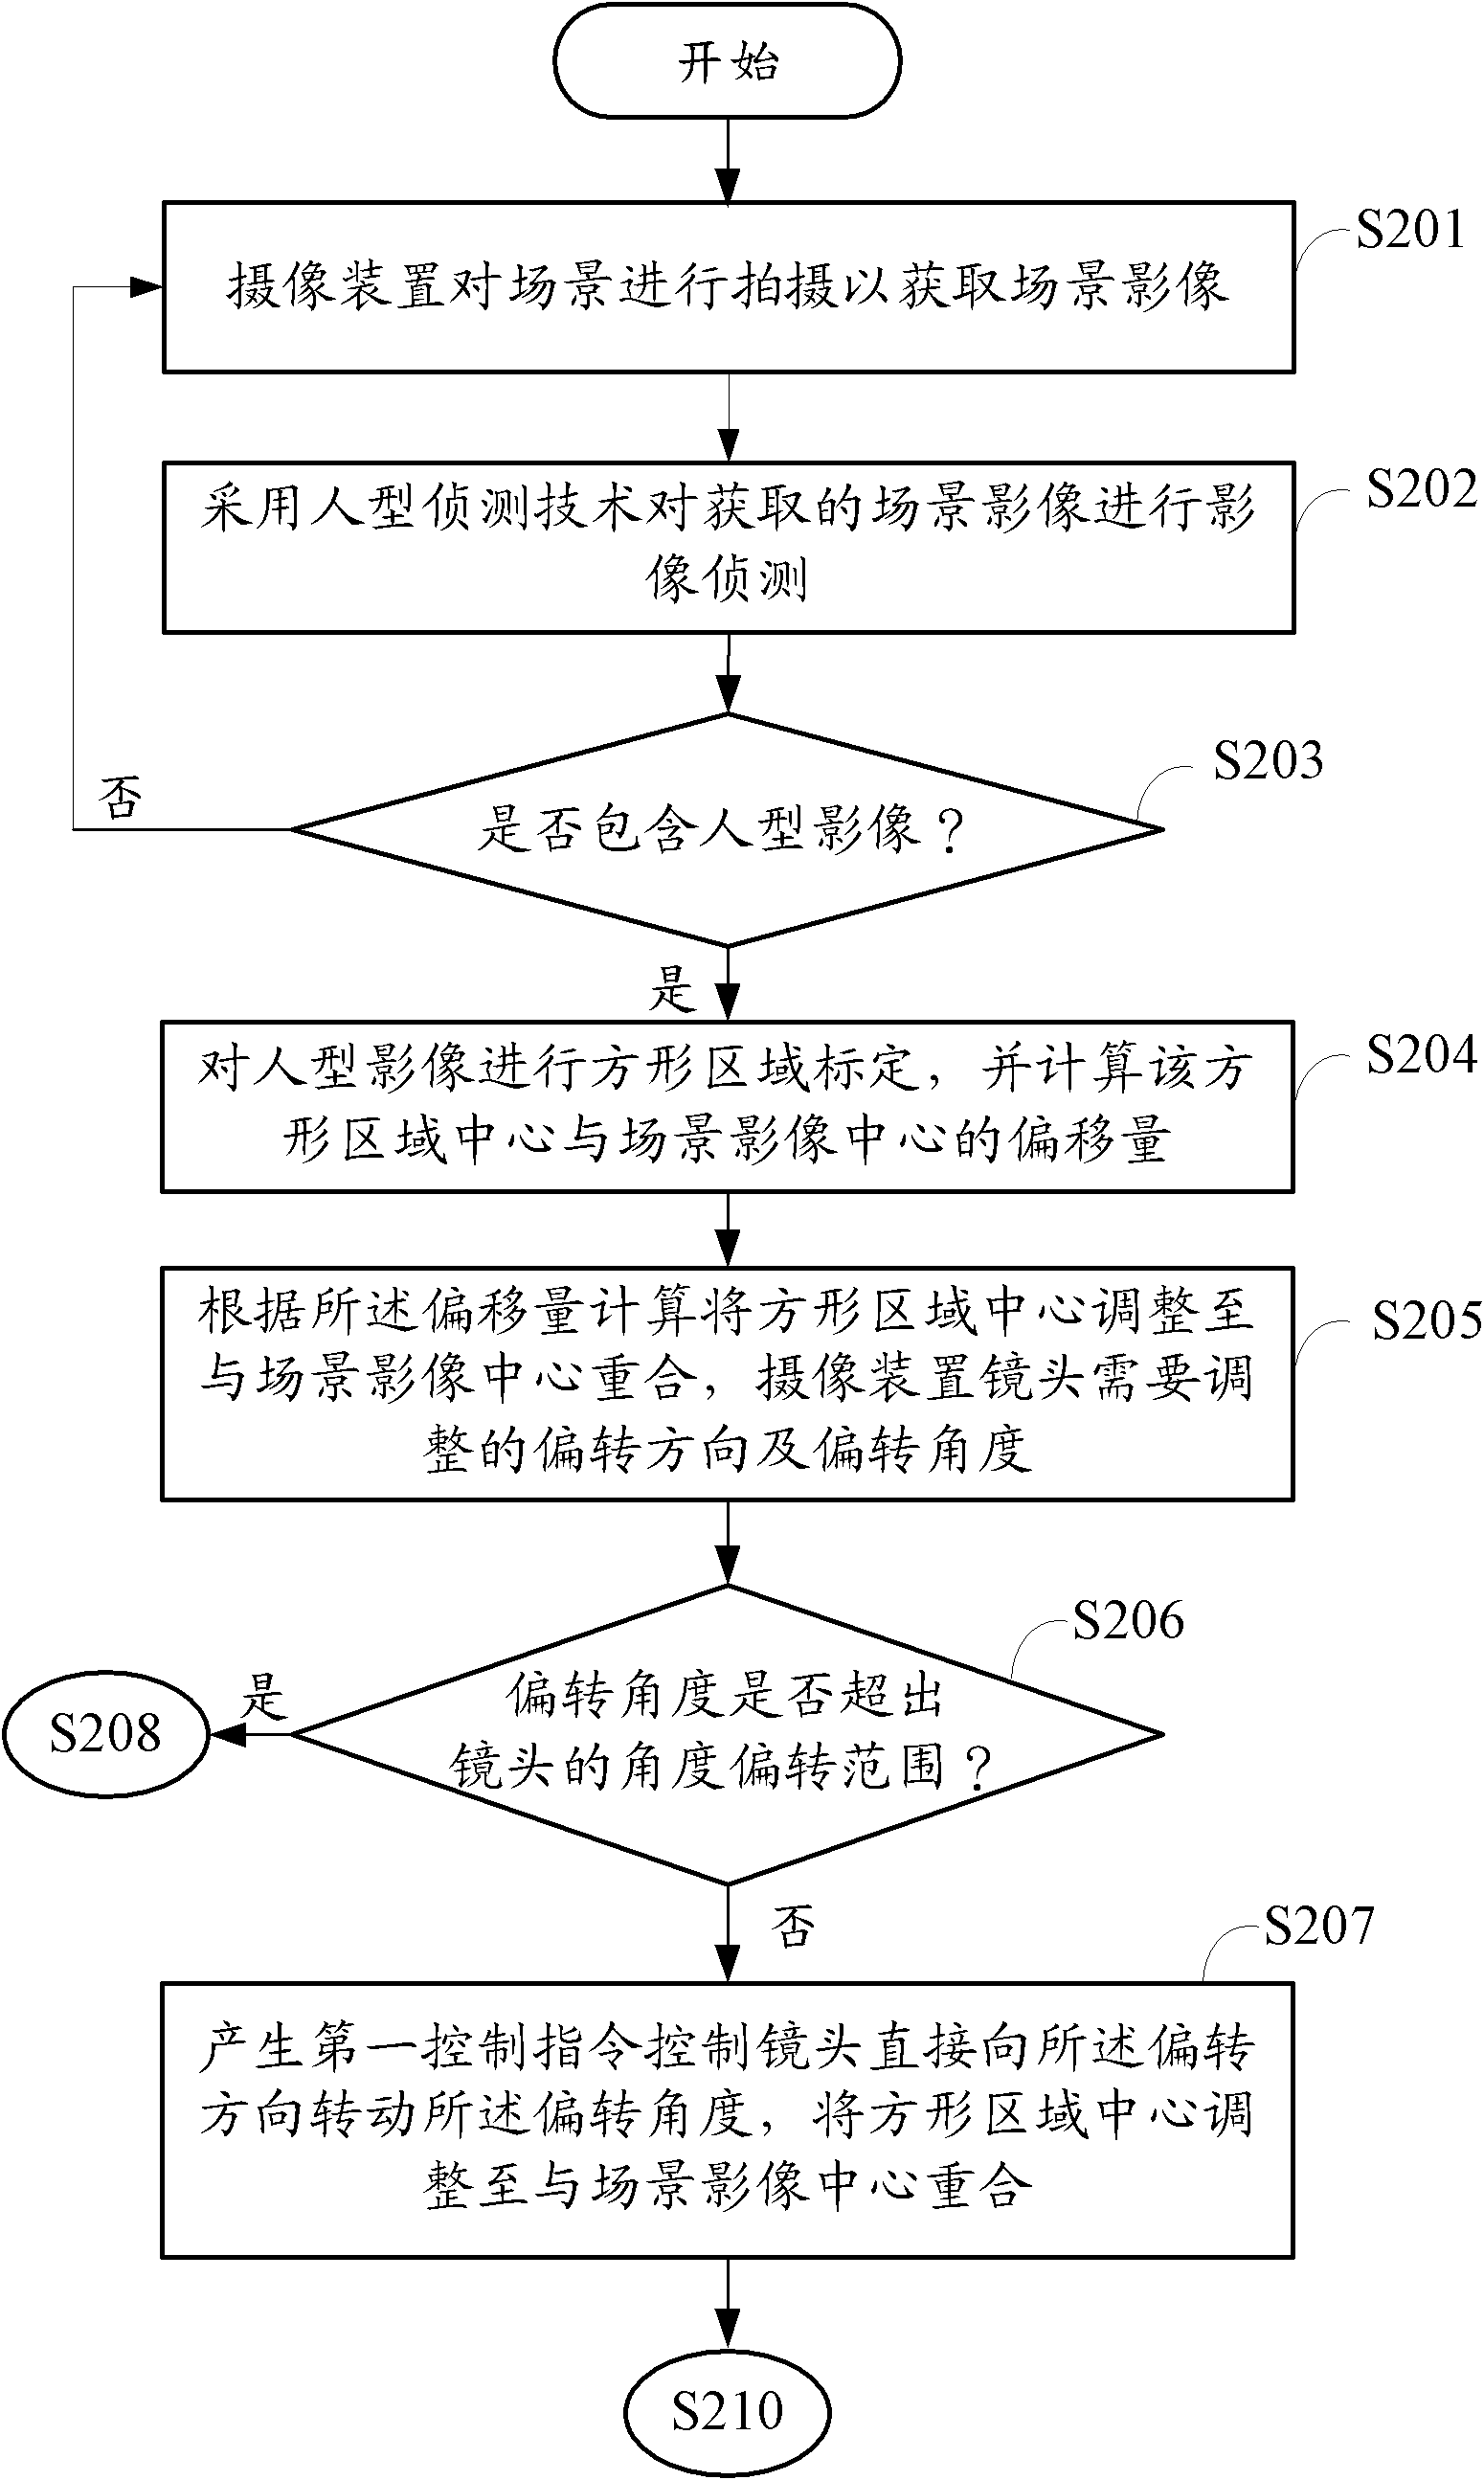 Unmanned aerial vehicle control system and method